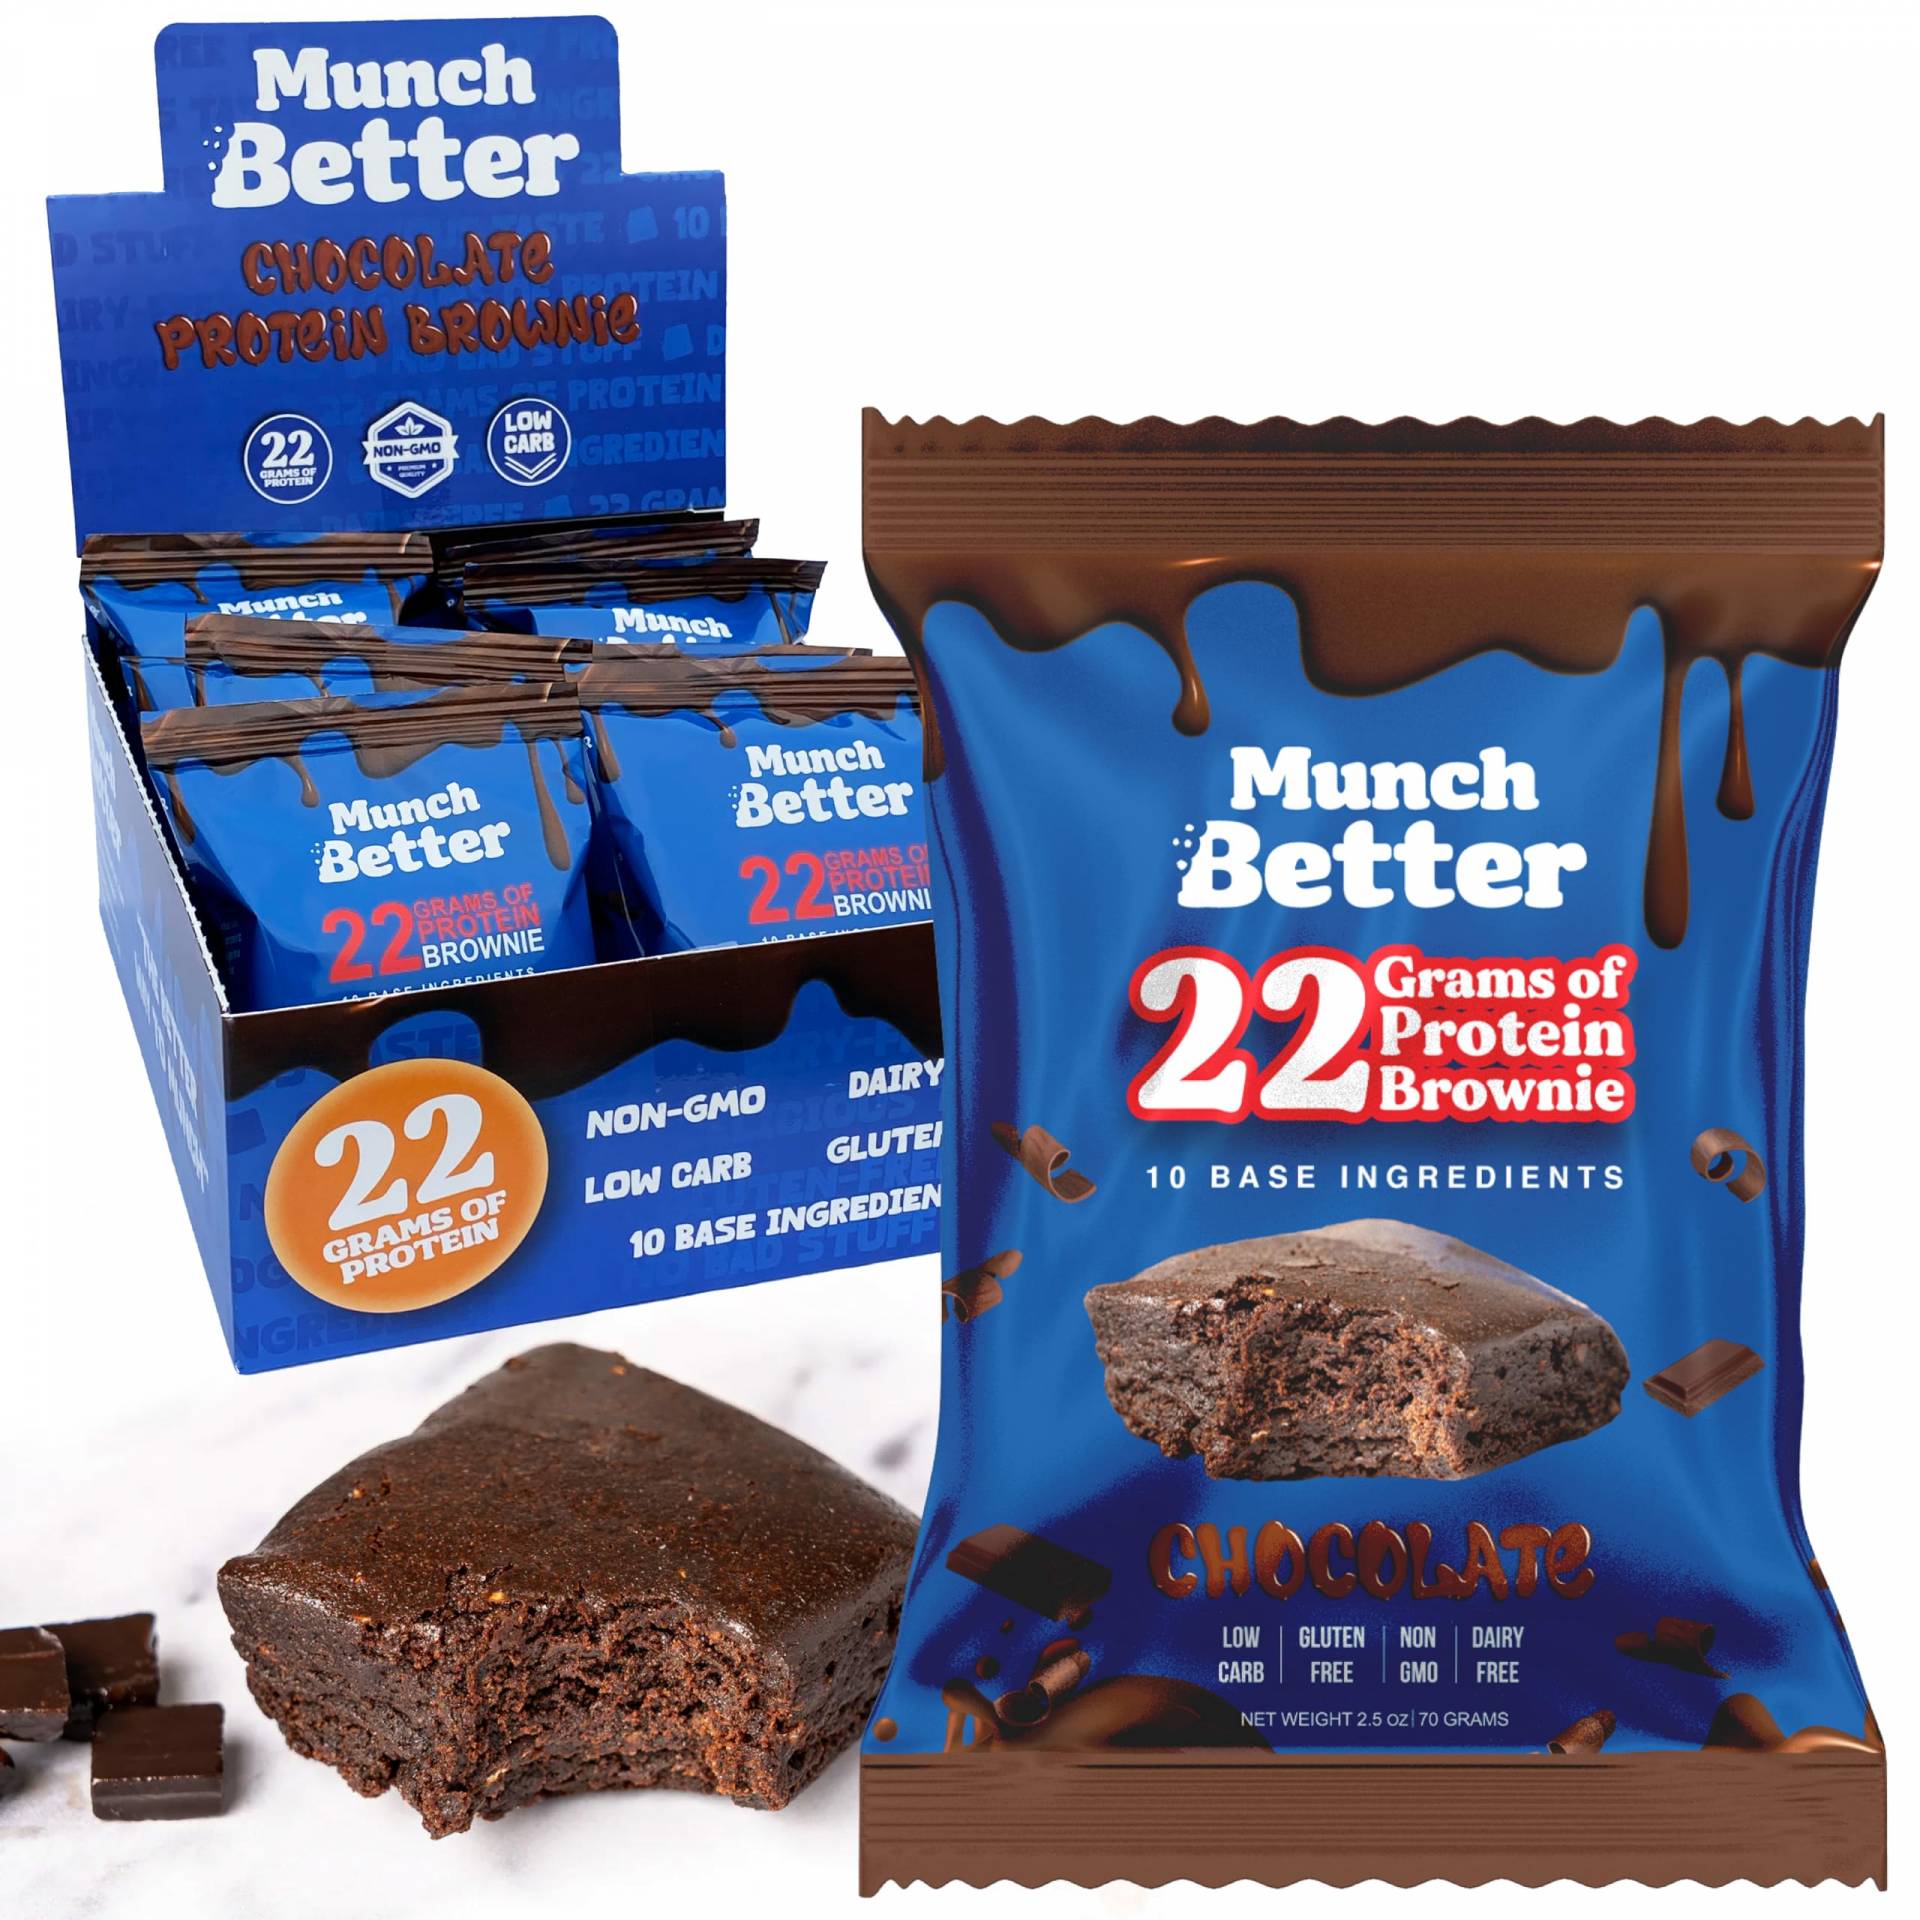 Munch Better Protein Brownies - $3.99